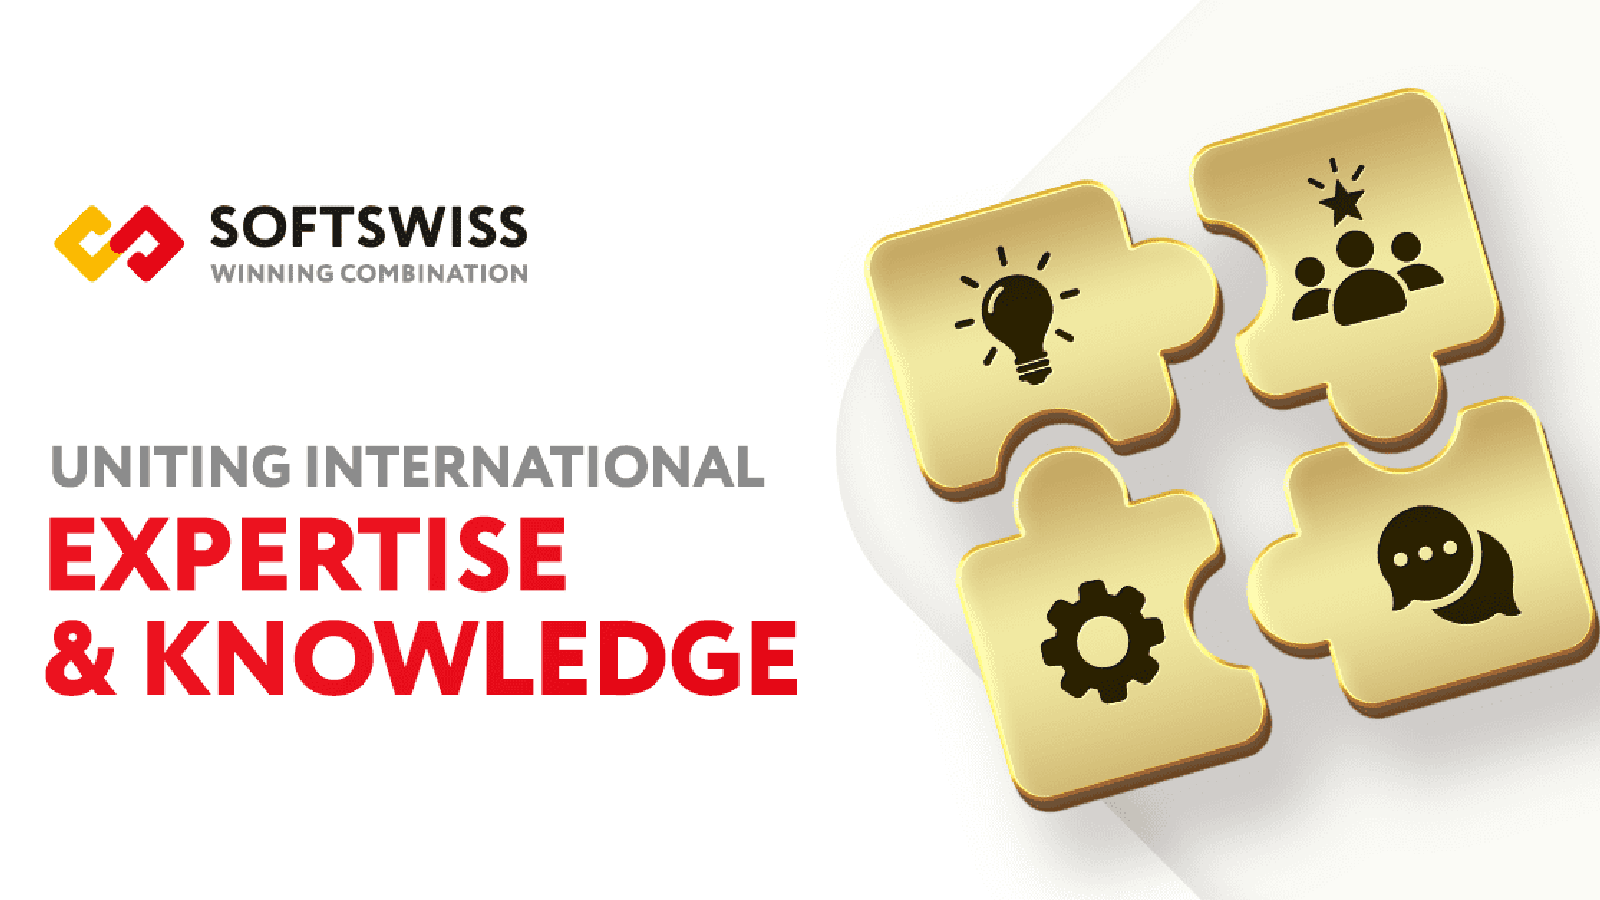 iGaming Trends: SOFTSWISS Values Fest